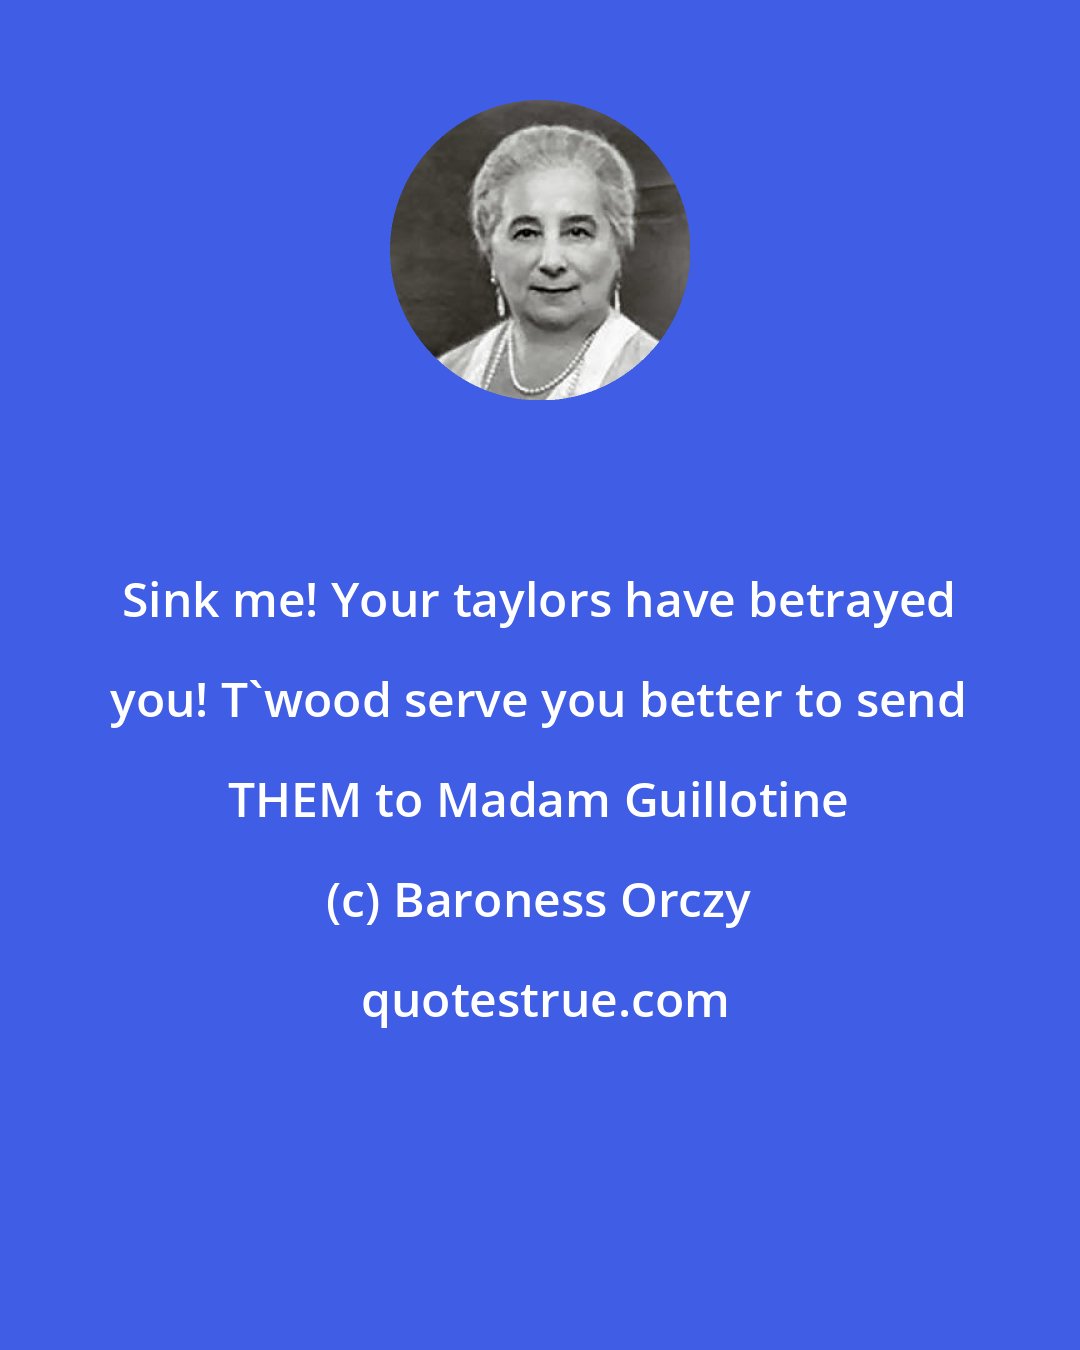 Baroness Orczy: Sink me! Your taylors have betrayed you! T'wood serve you better to send THEM to Madam Guillotine